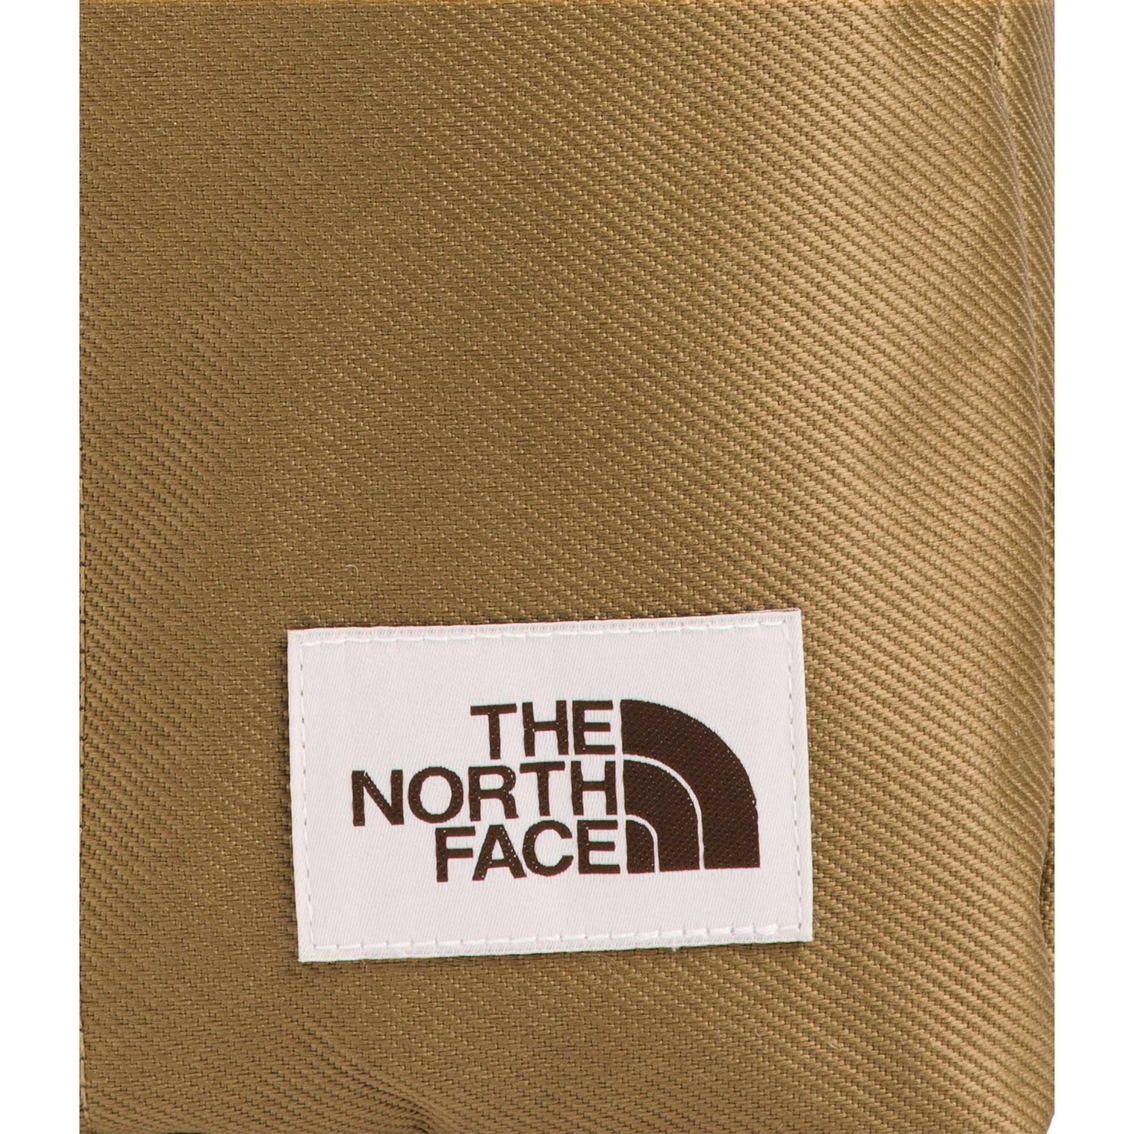 The North Face Field Bag | Accessories | Clothing & Accessories | Shop